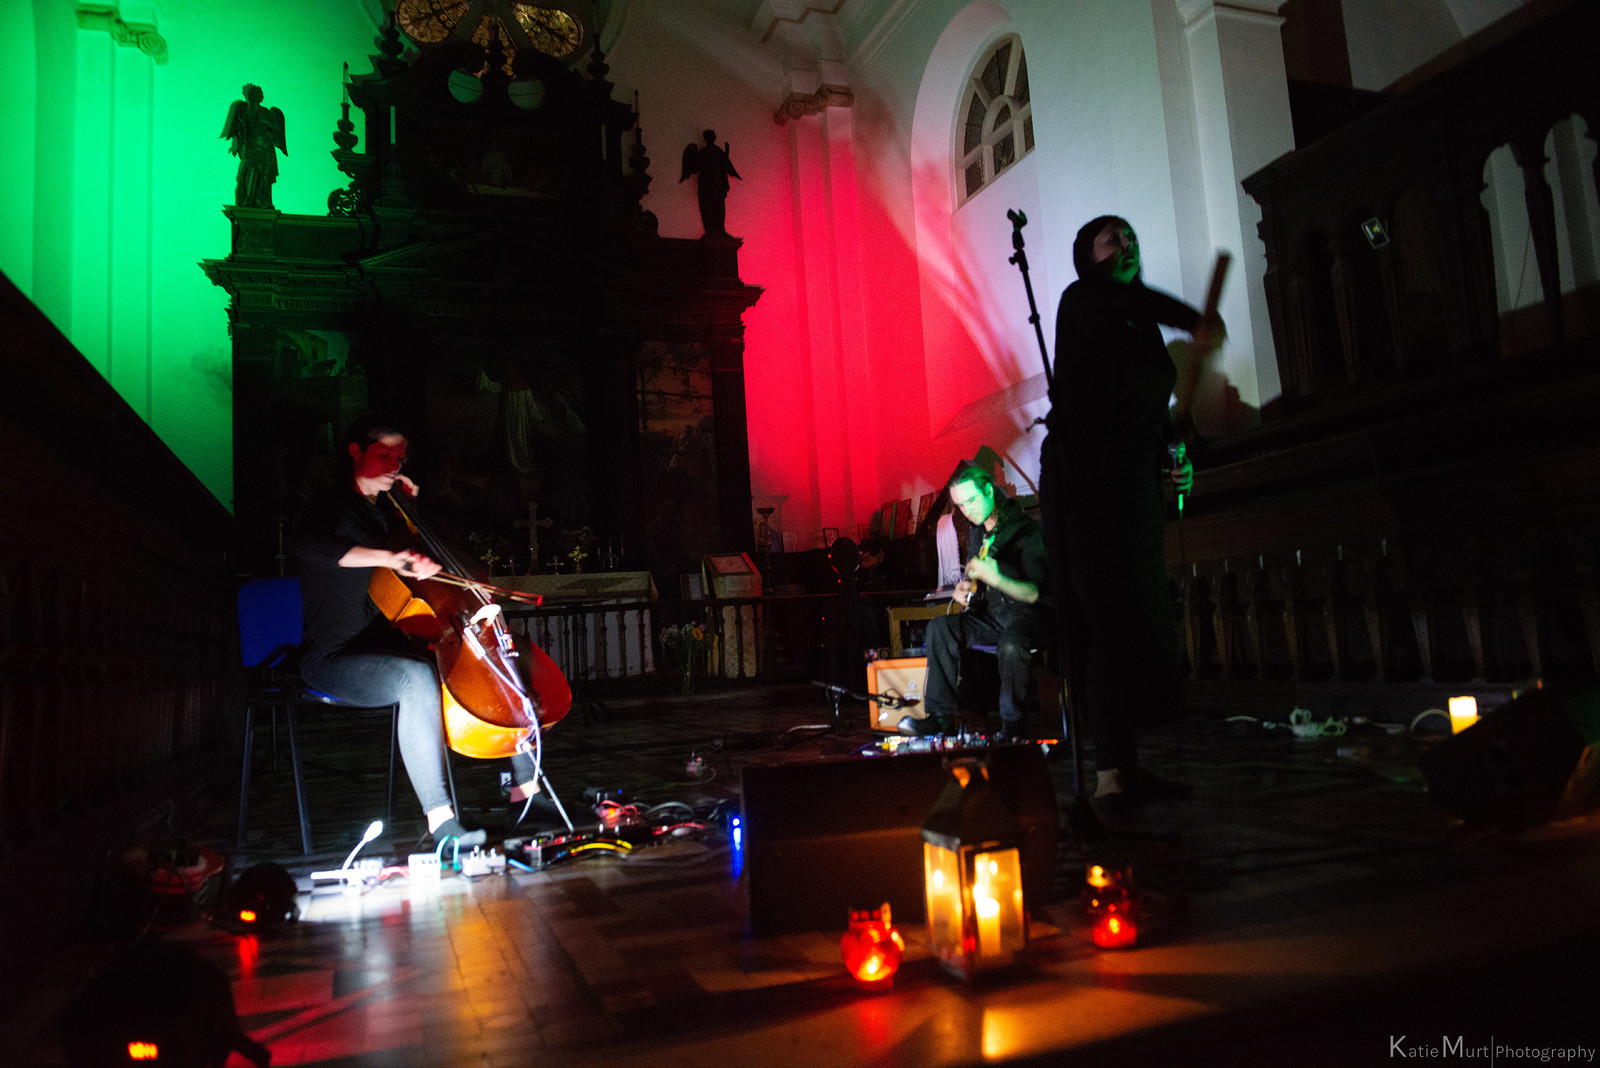 Dead Space Chamber Music debut album launch event at The Crypt of St John on the Wall, Bristol